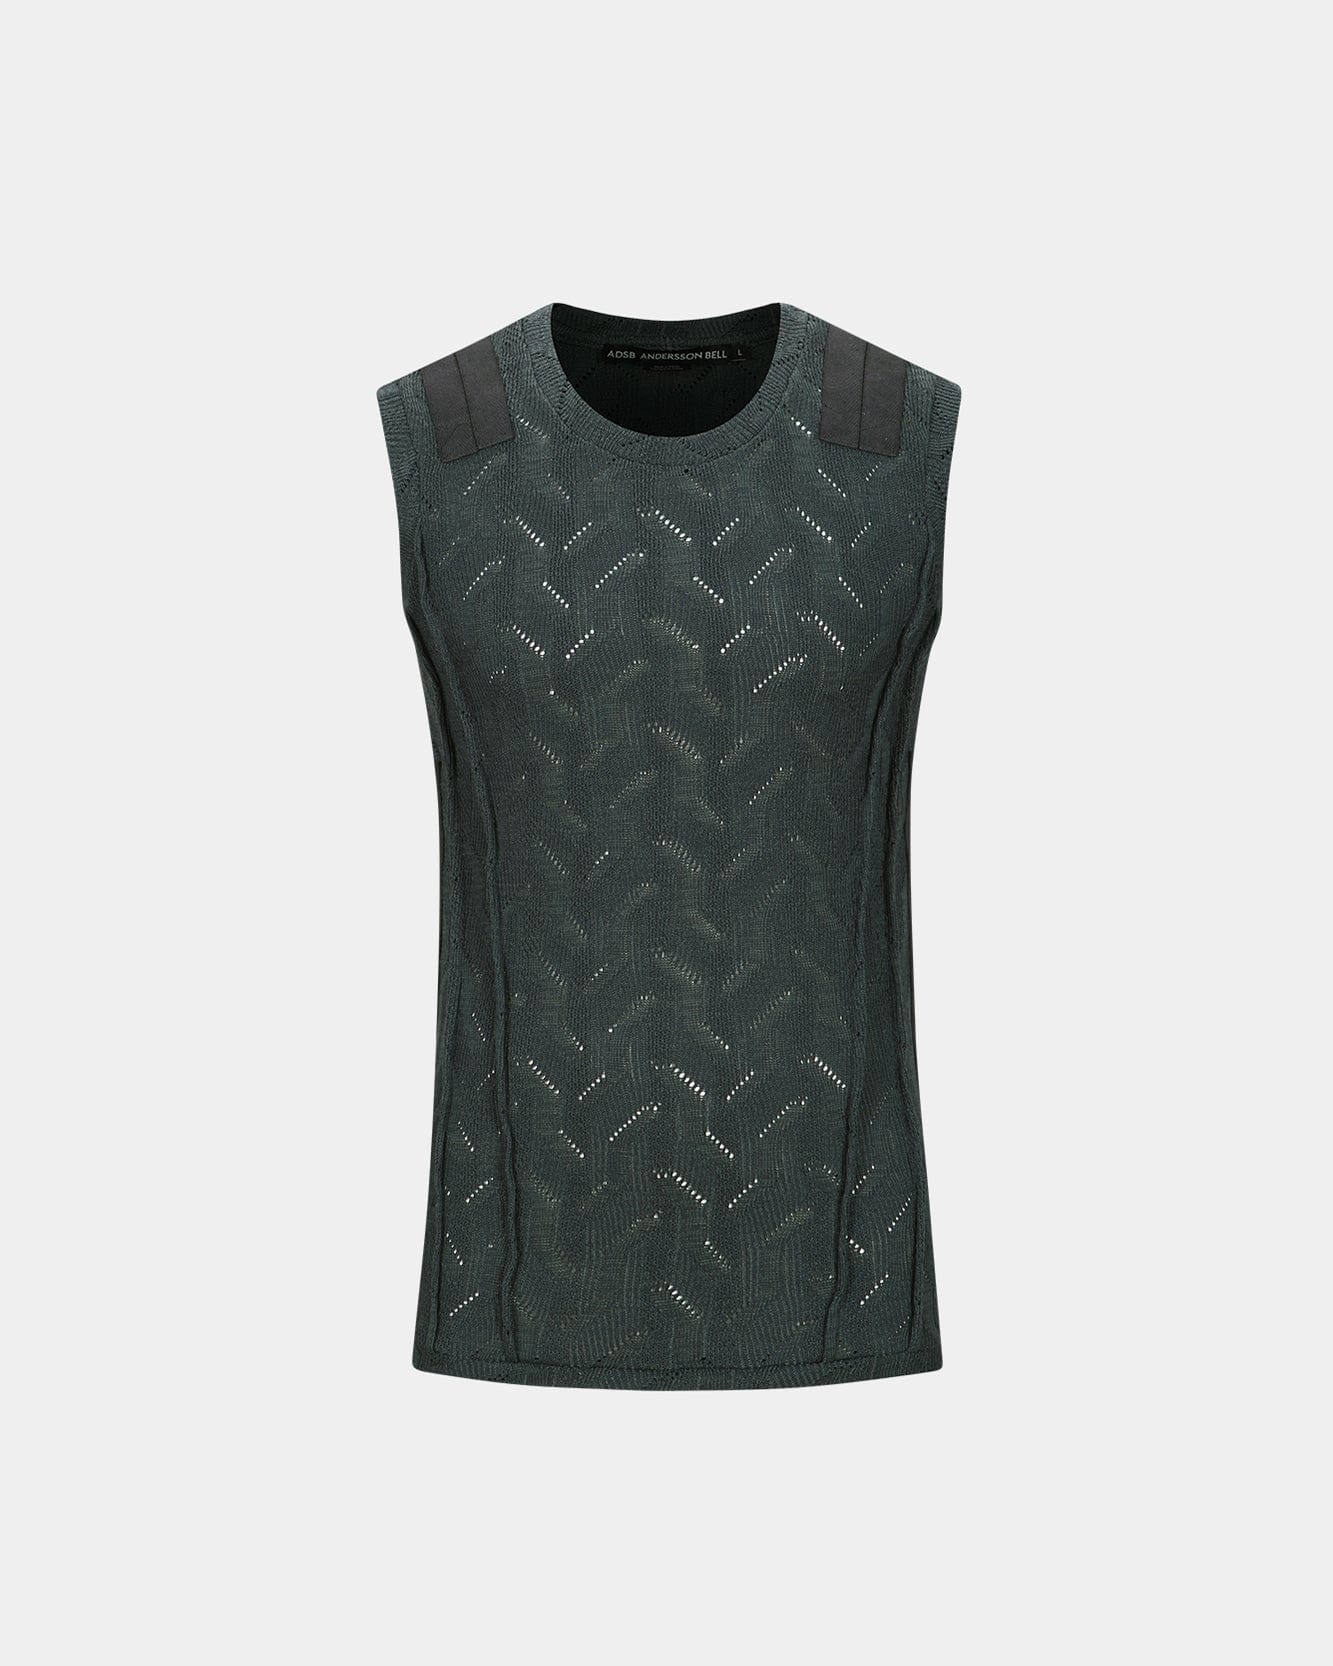 Andersson Bell WADEN MILITARY SLEEVELESS atb1077m(CHARCOAL)